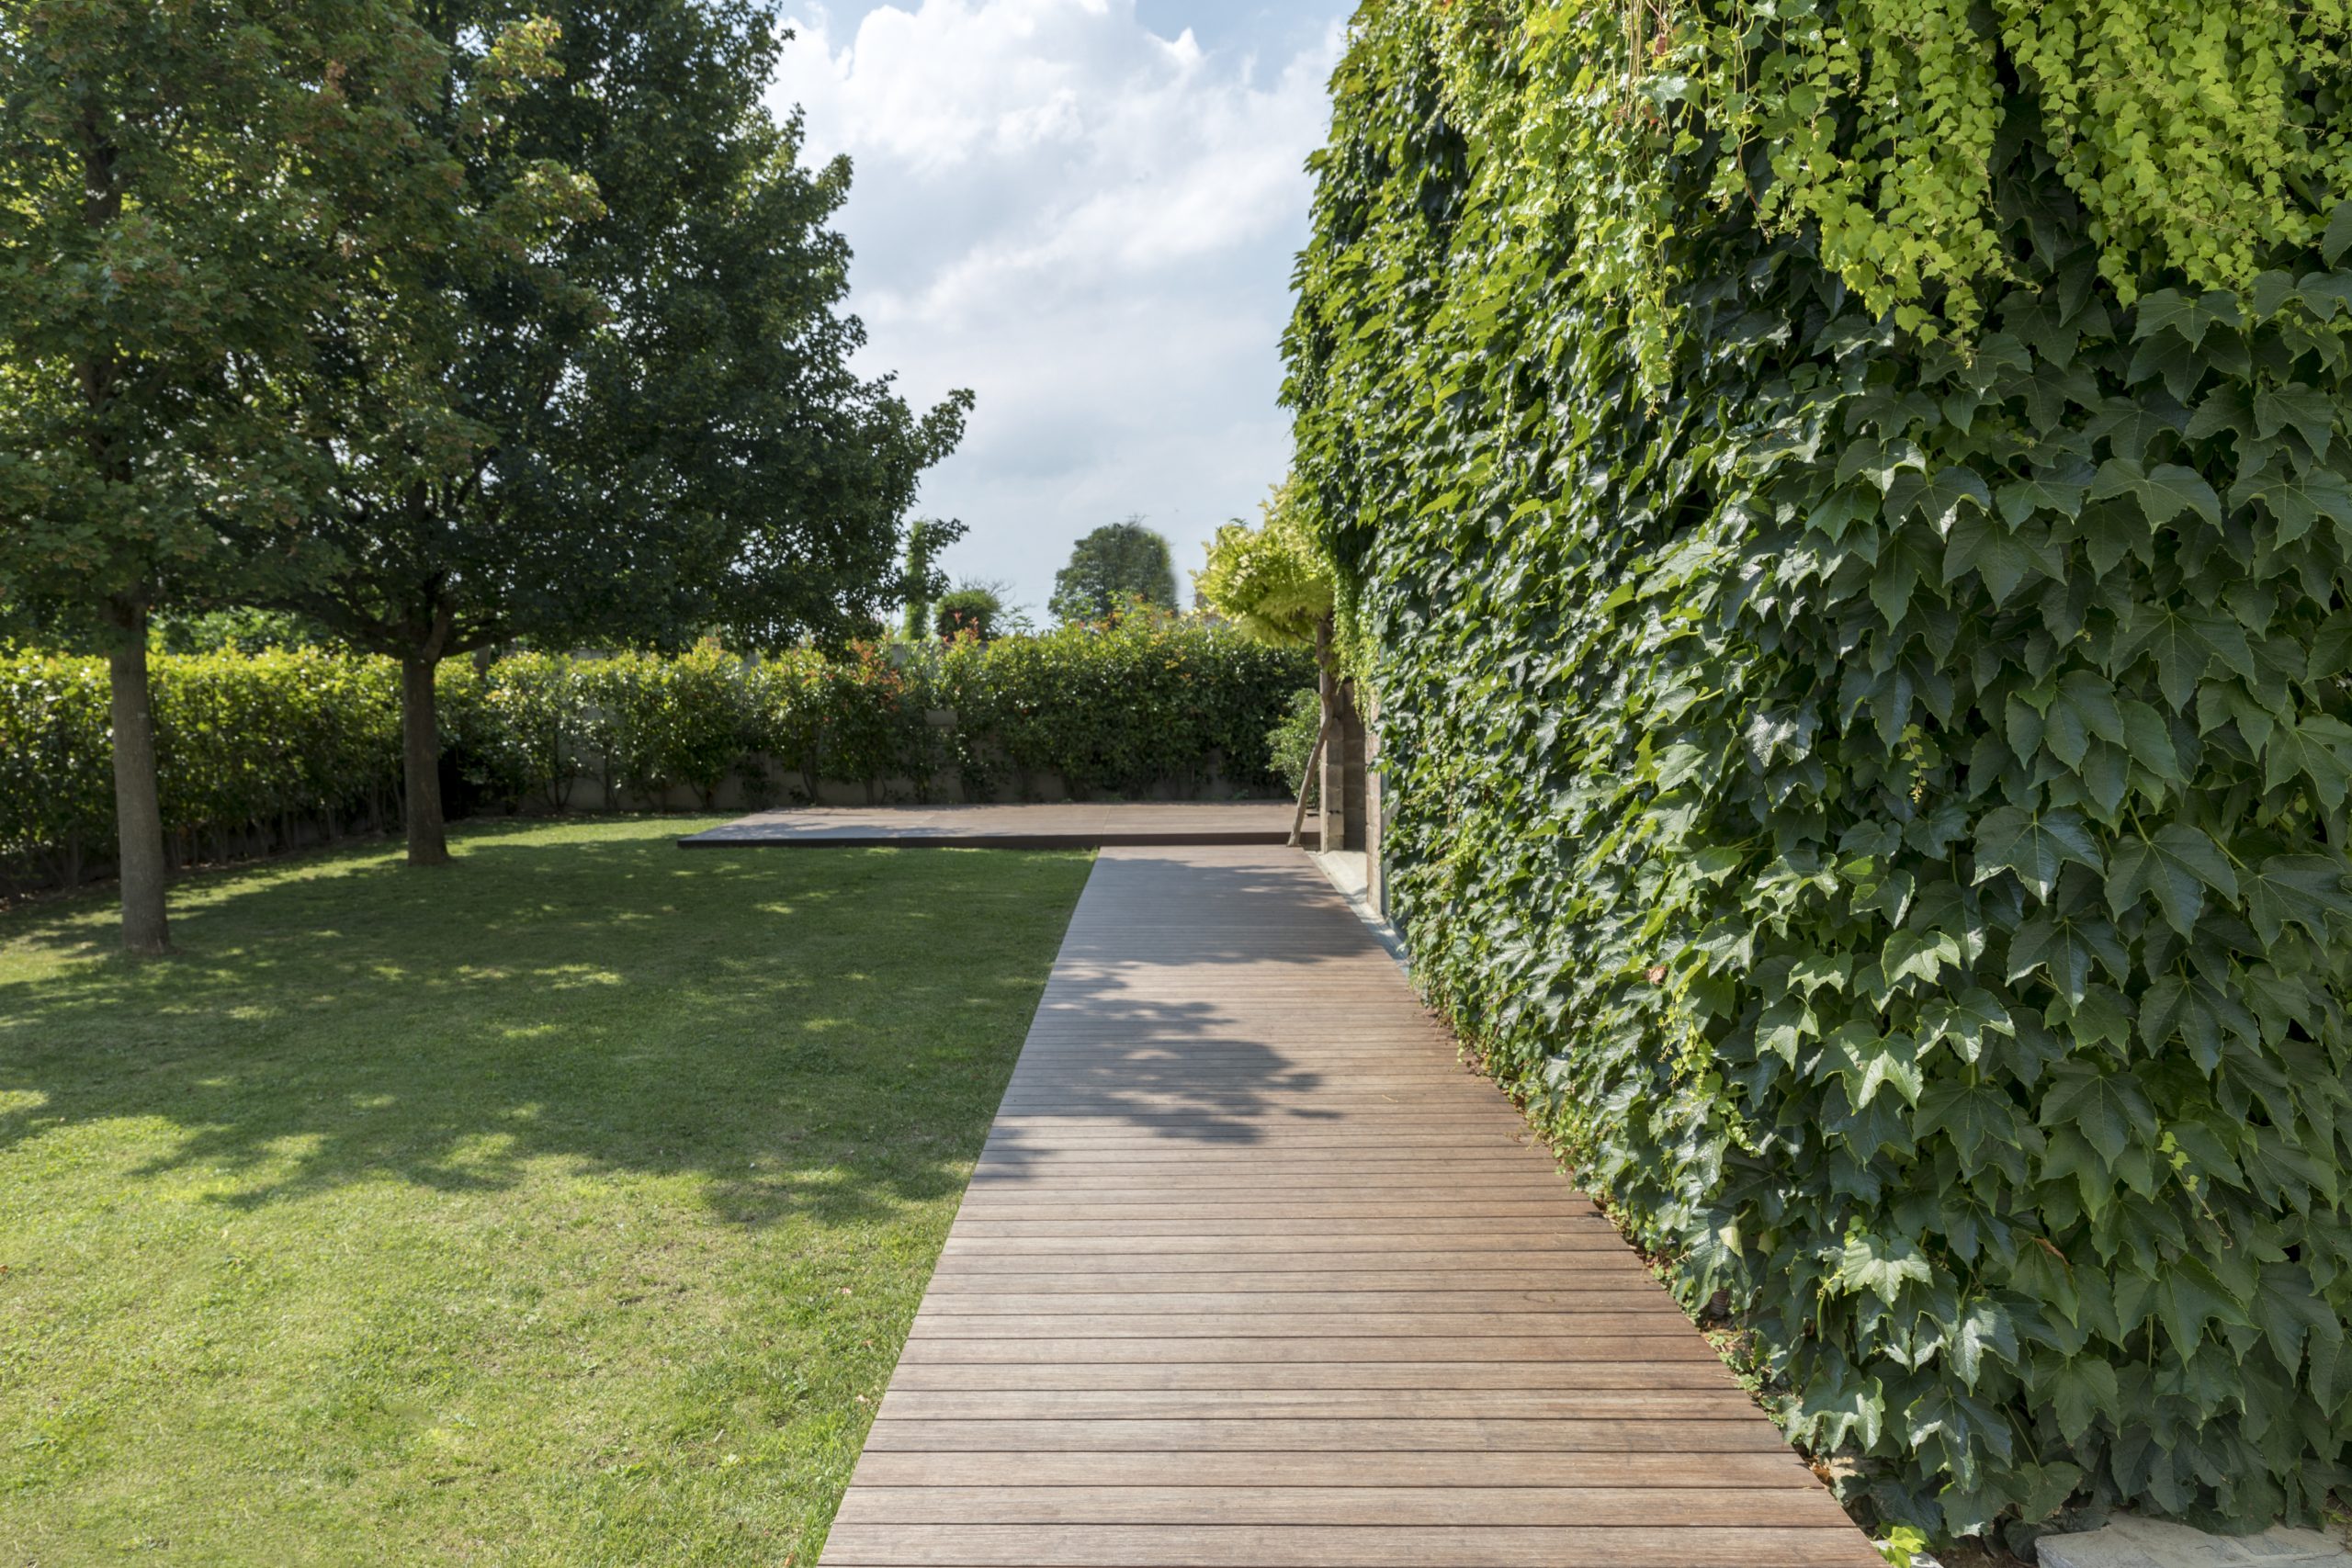 What Makes Bamboo an Effective Material For Decking Boards and Tiles?